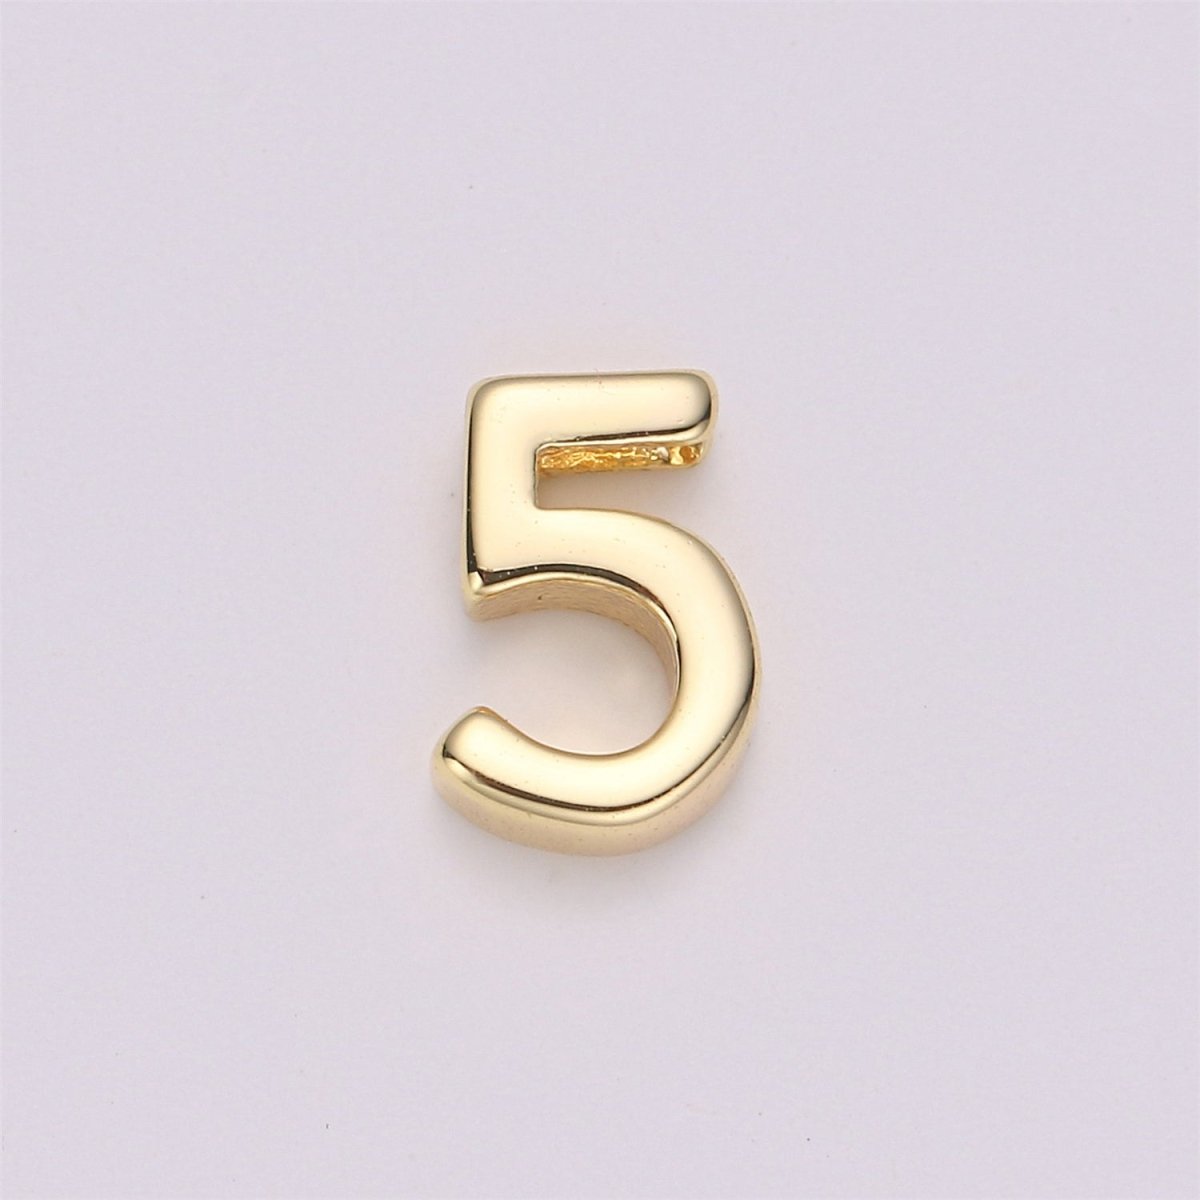 18k Gold Filled Number Charms With 1.5mm Open Sides, Lucky number set for necklace jewelry bracelet making Supply Slide Letter Pendant - DLUXCA